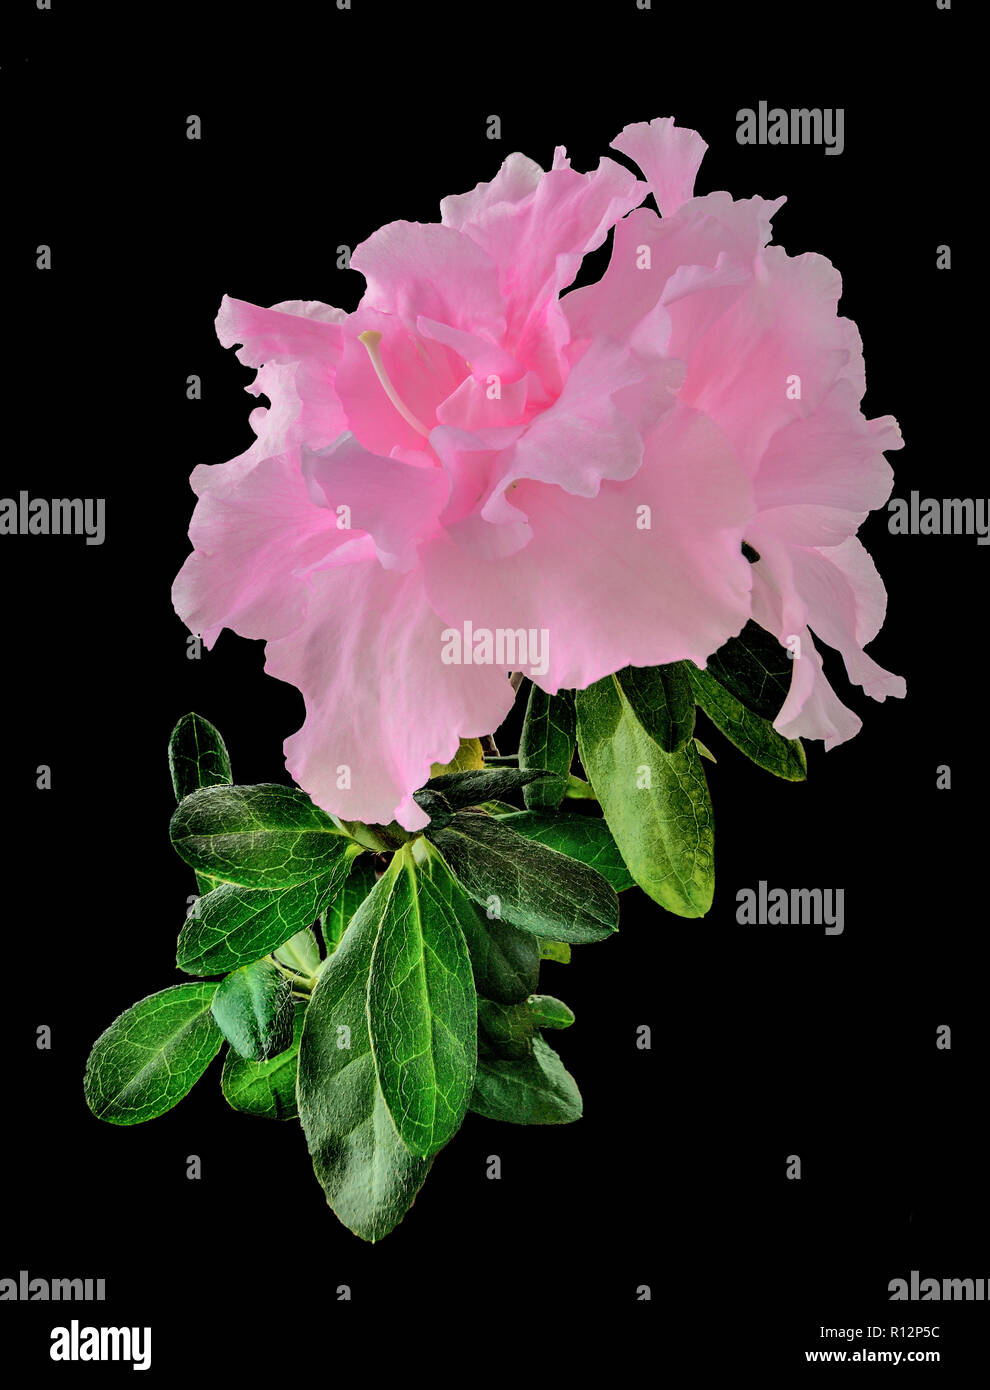 Delicate light pink Azalea flowers (Rhododendron) with leaves close up, isolated on a black background - amazingly beautiful ornamental plant, floral  Stock Photo